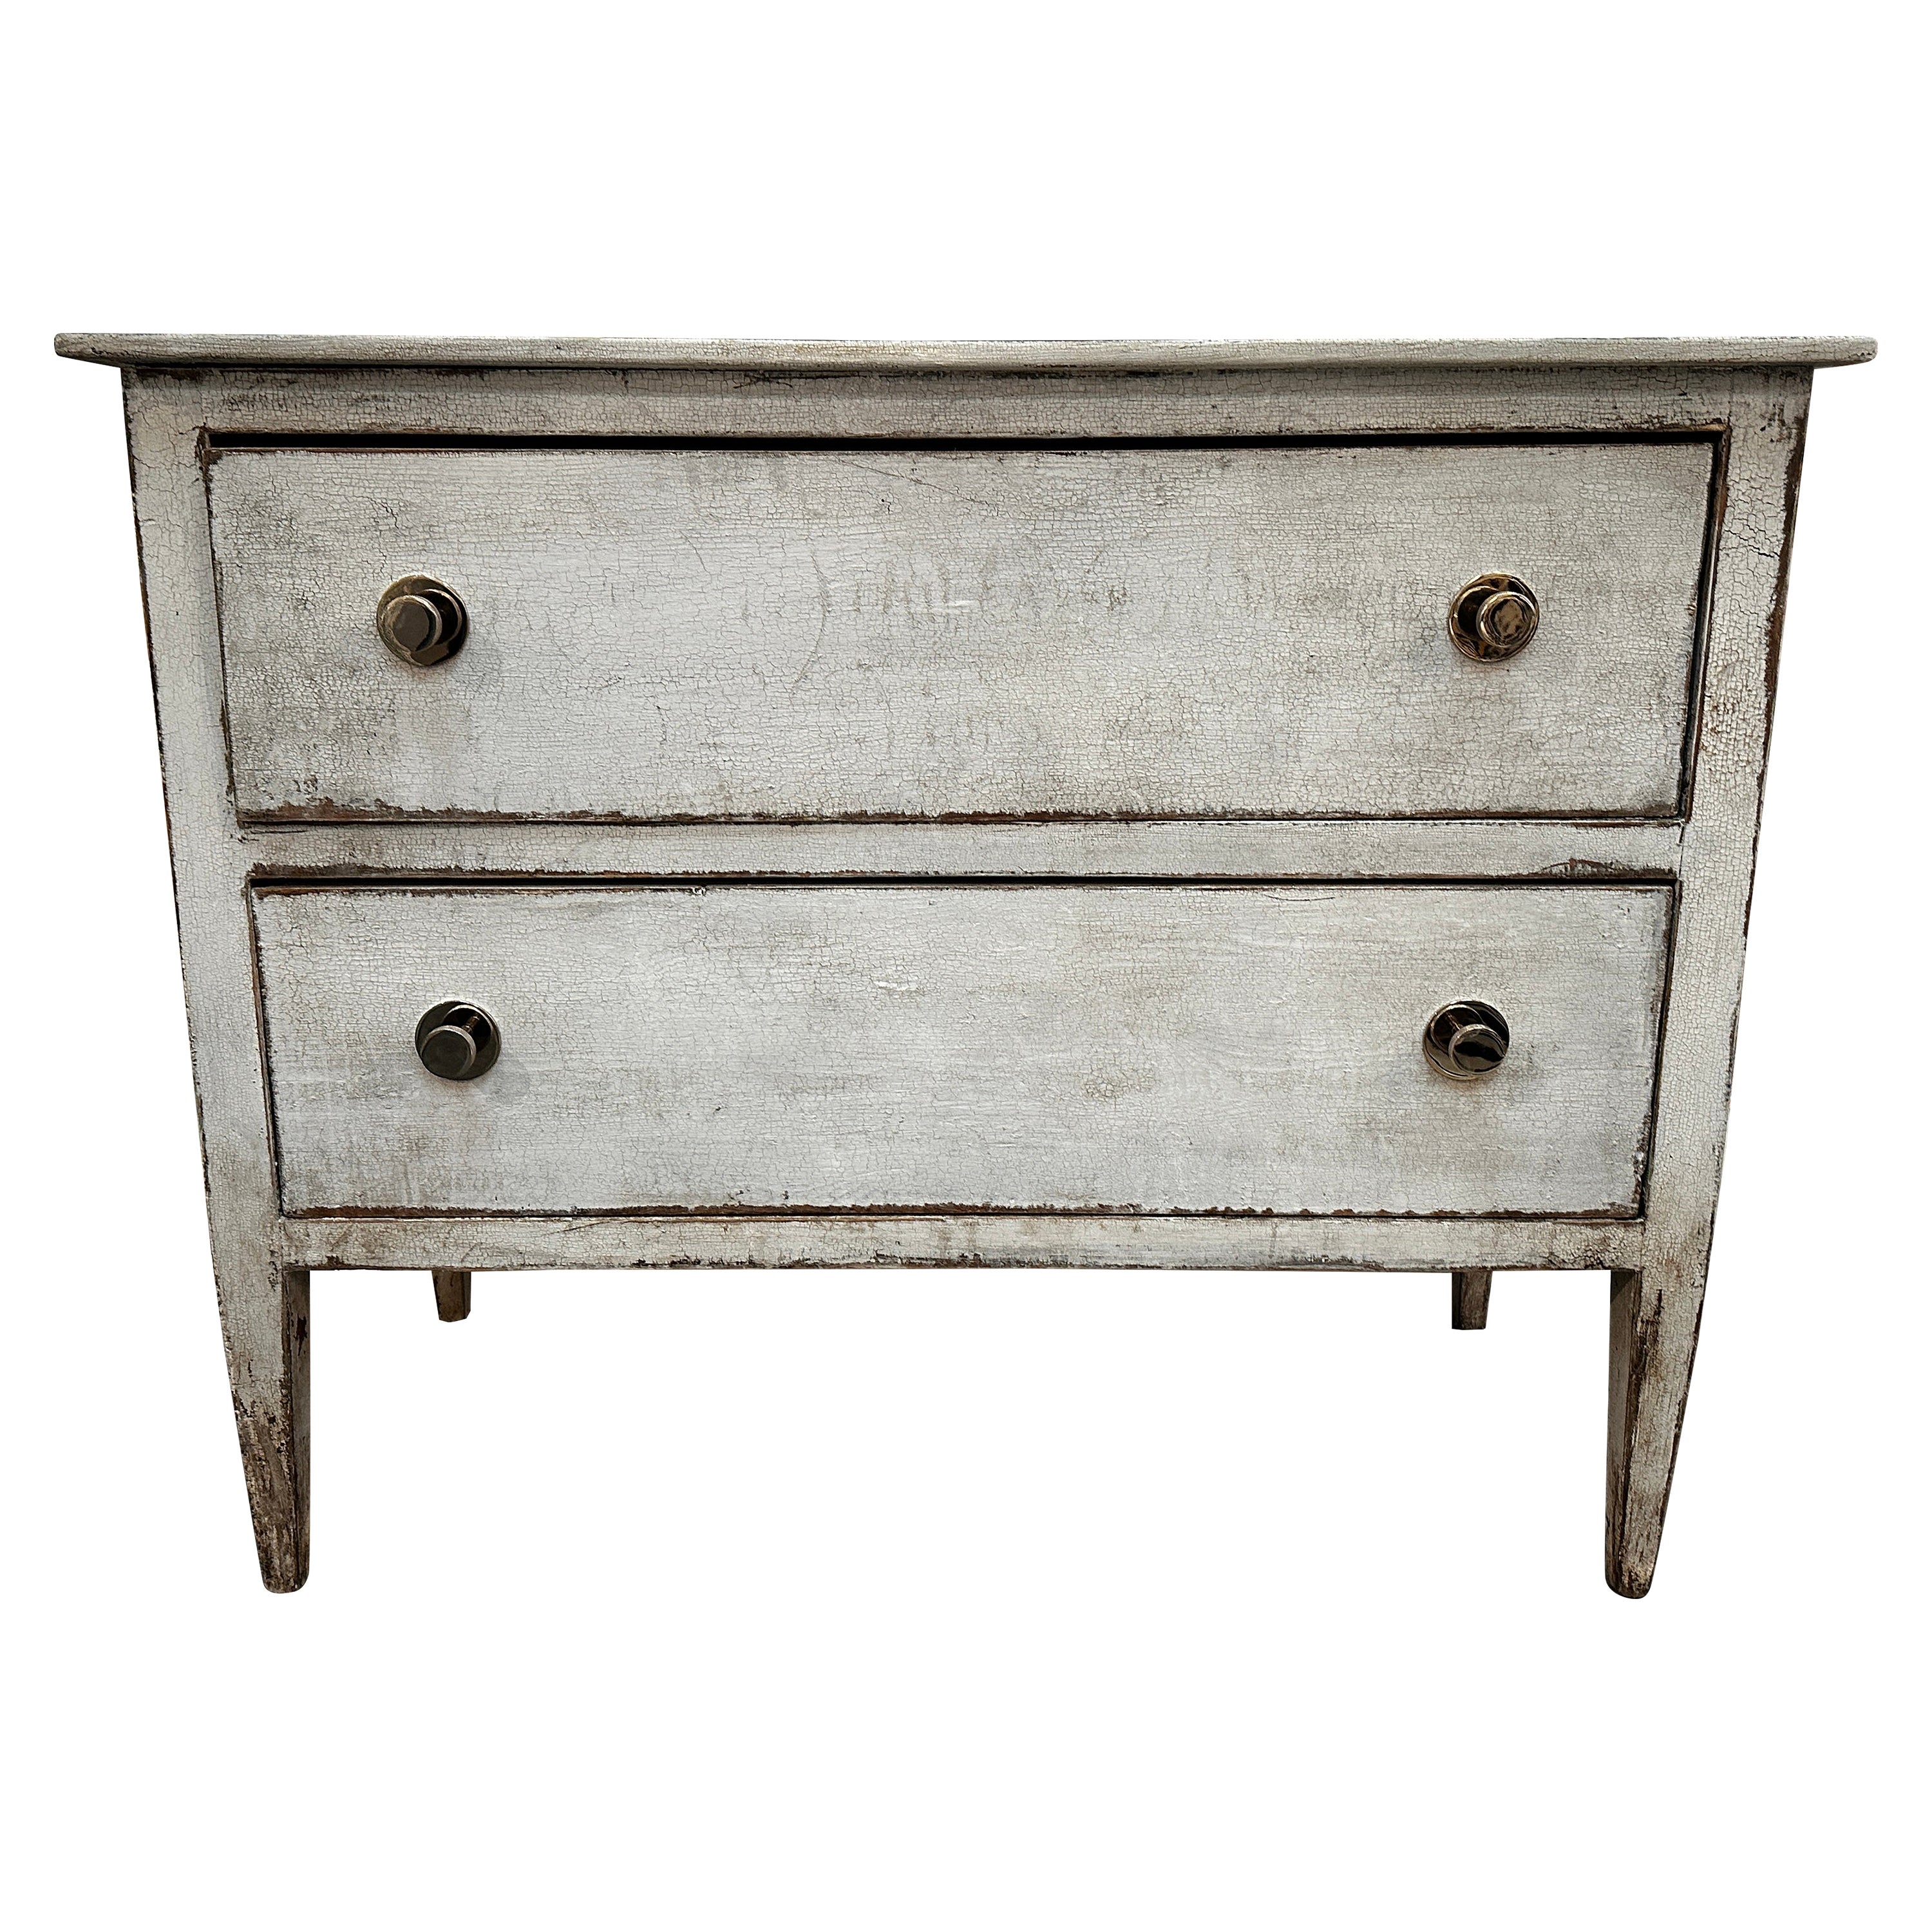 Antique Italian Painted Chest with nickel knobs For Sale